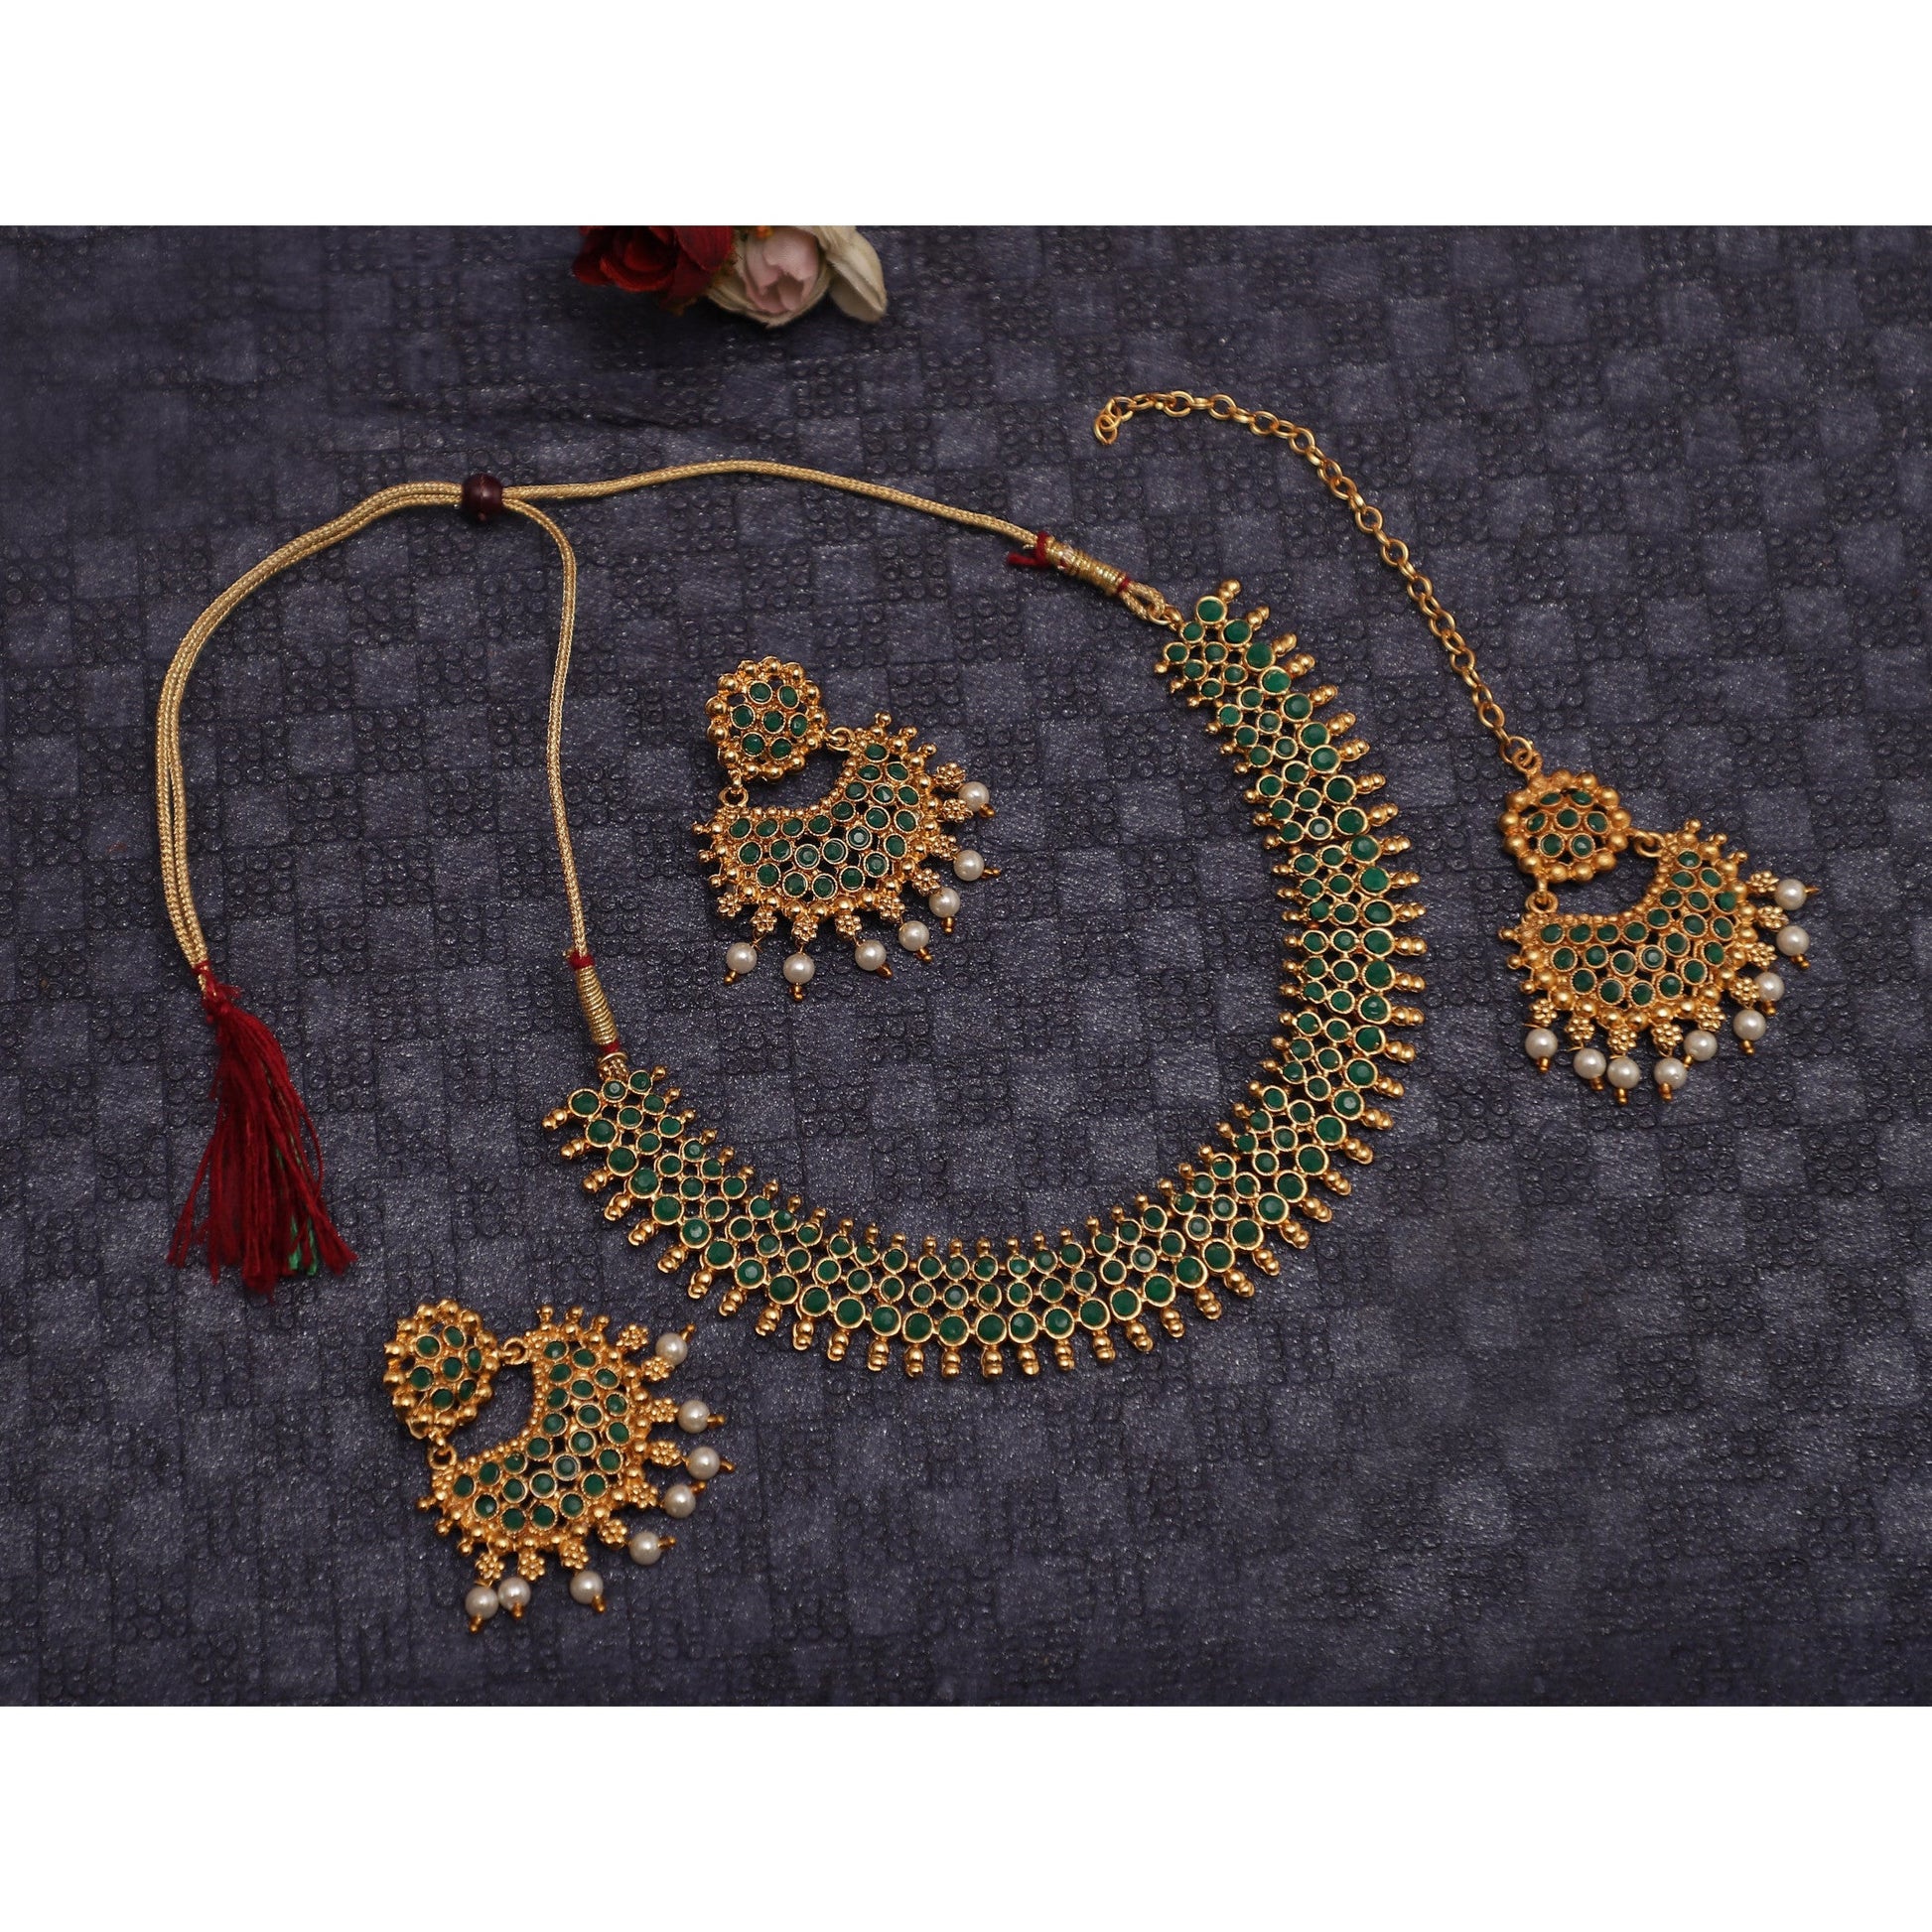 Best Traditional Handcrafted Designed by Mekkna of Necklace, Maang-Tika with Earrings for Women. Now We can Book This Jewellery set online from Mekkna.